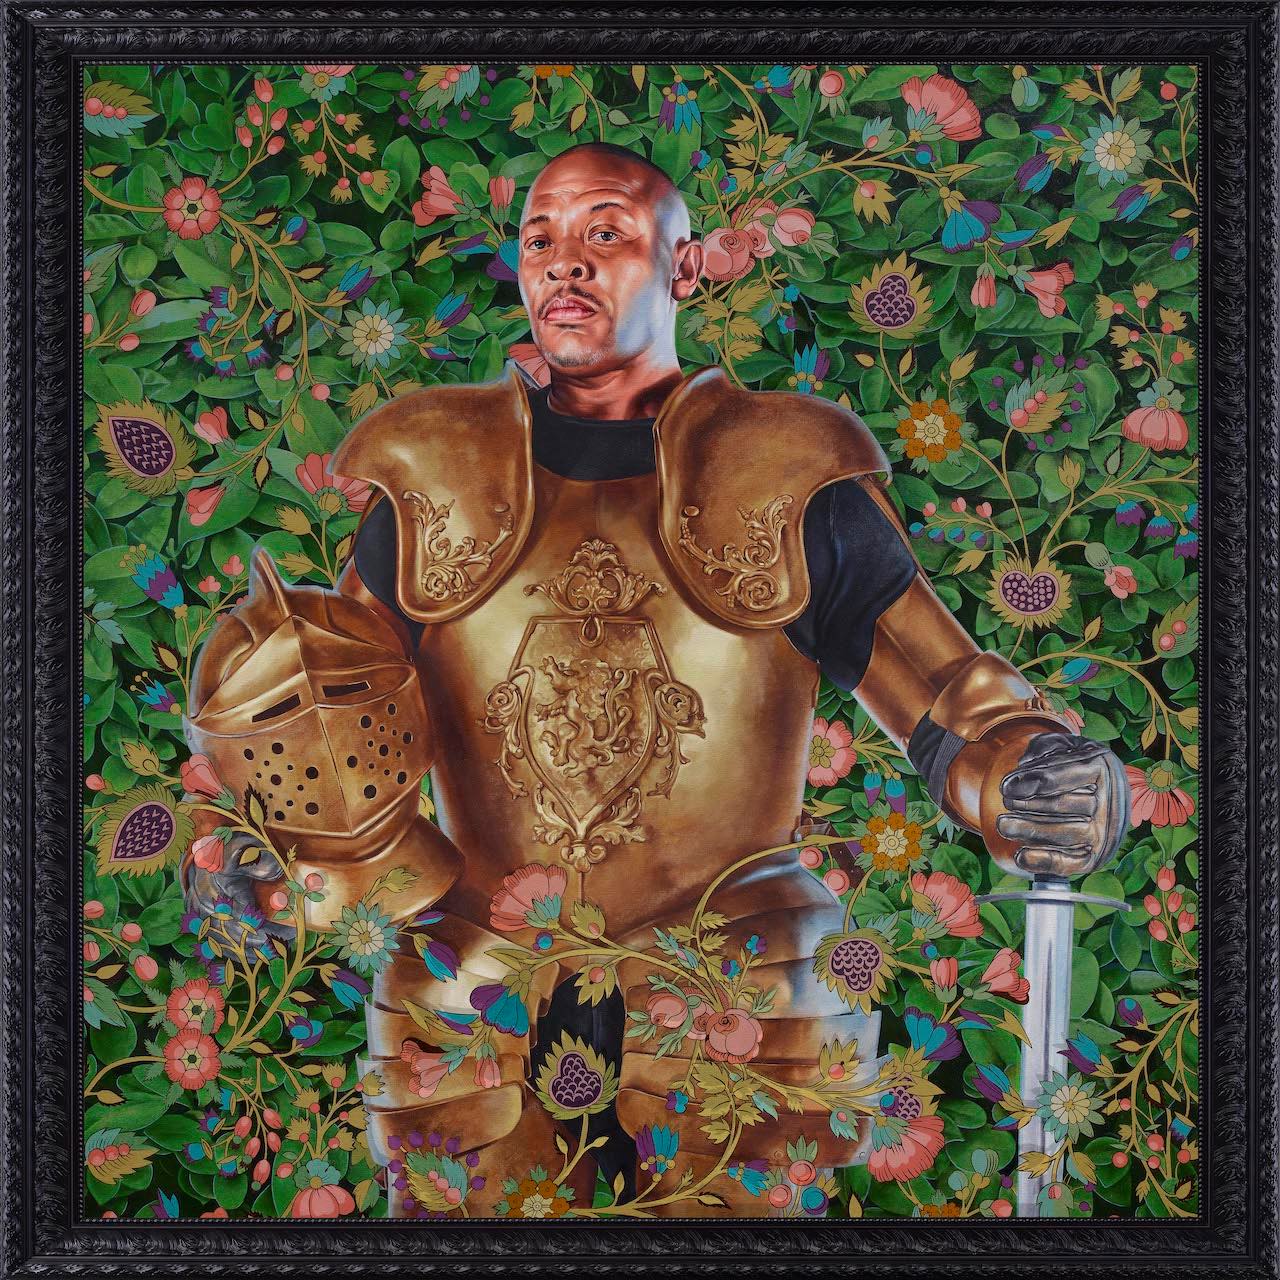 https://www.udiscovermusic.com/wp-content/uploads/2022/01/Kehinde-Wiley-Dr.-Dre-The-Chronic-copy-2-2.jpg